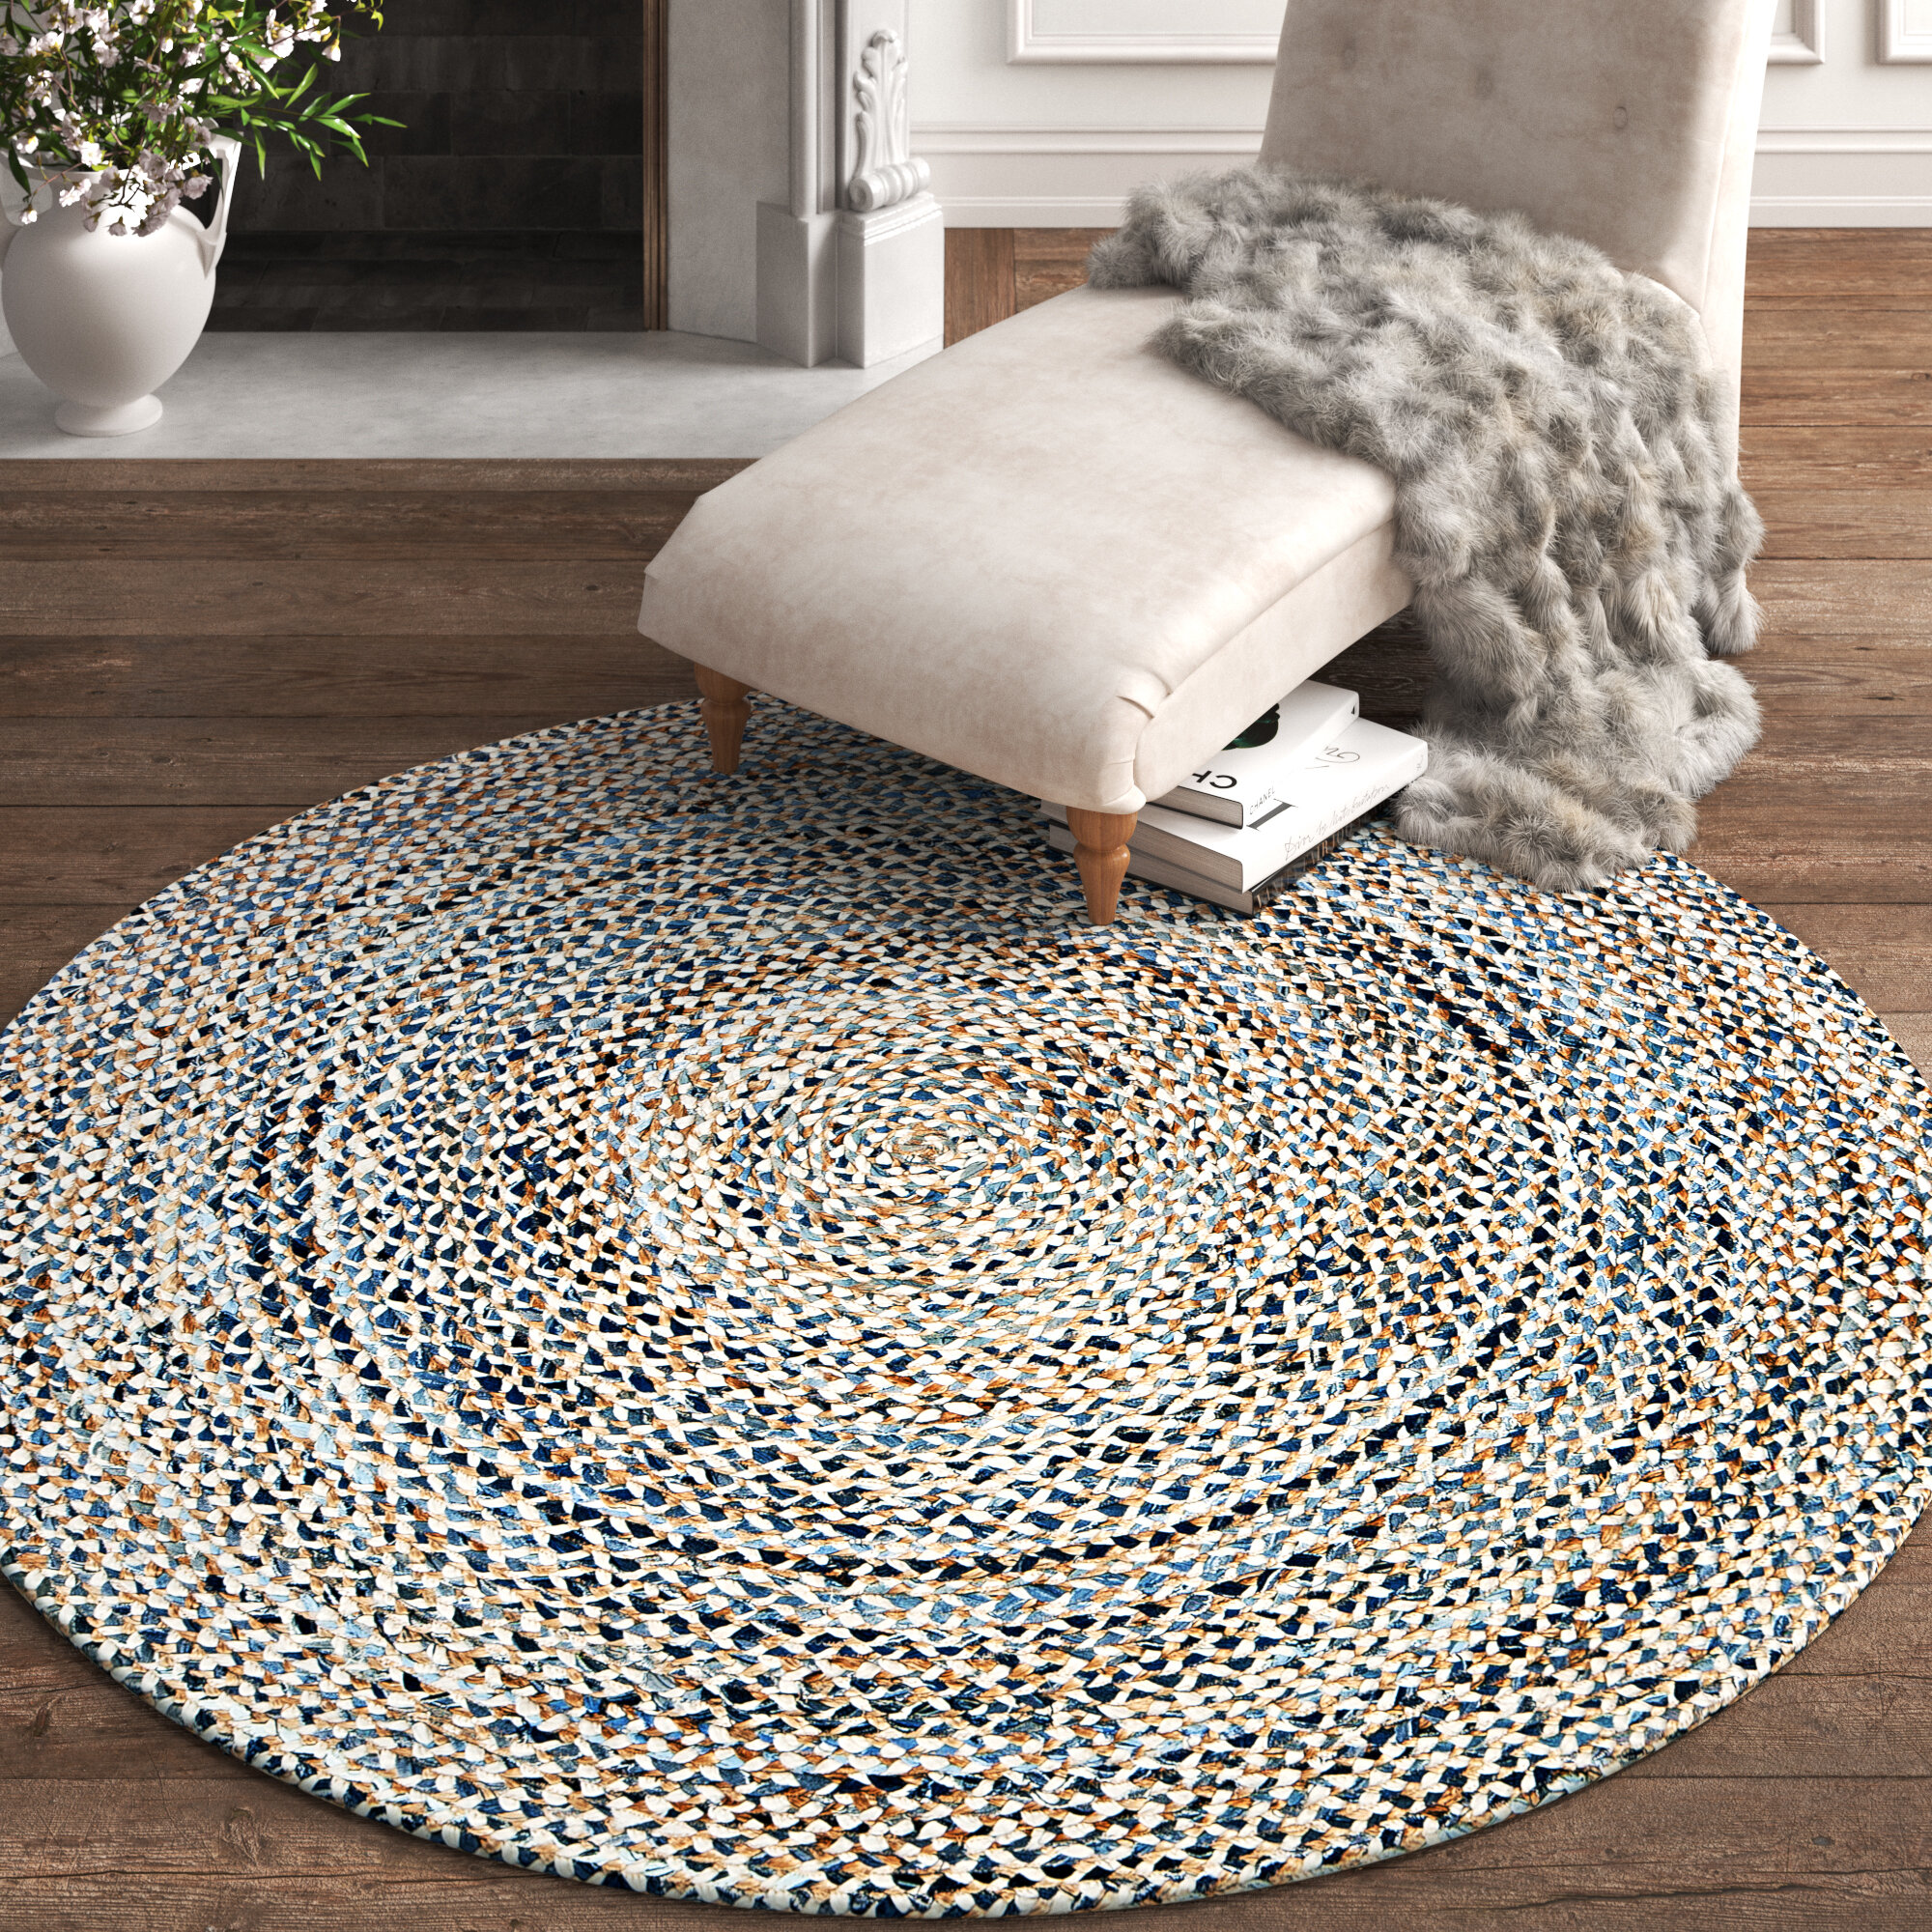 Round Braided Area Rug Cotton Hardwood Floors Natural Recycled Rug  Various Size 